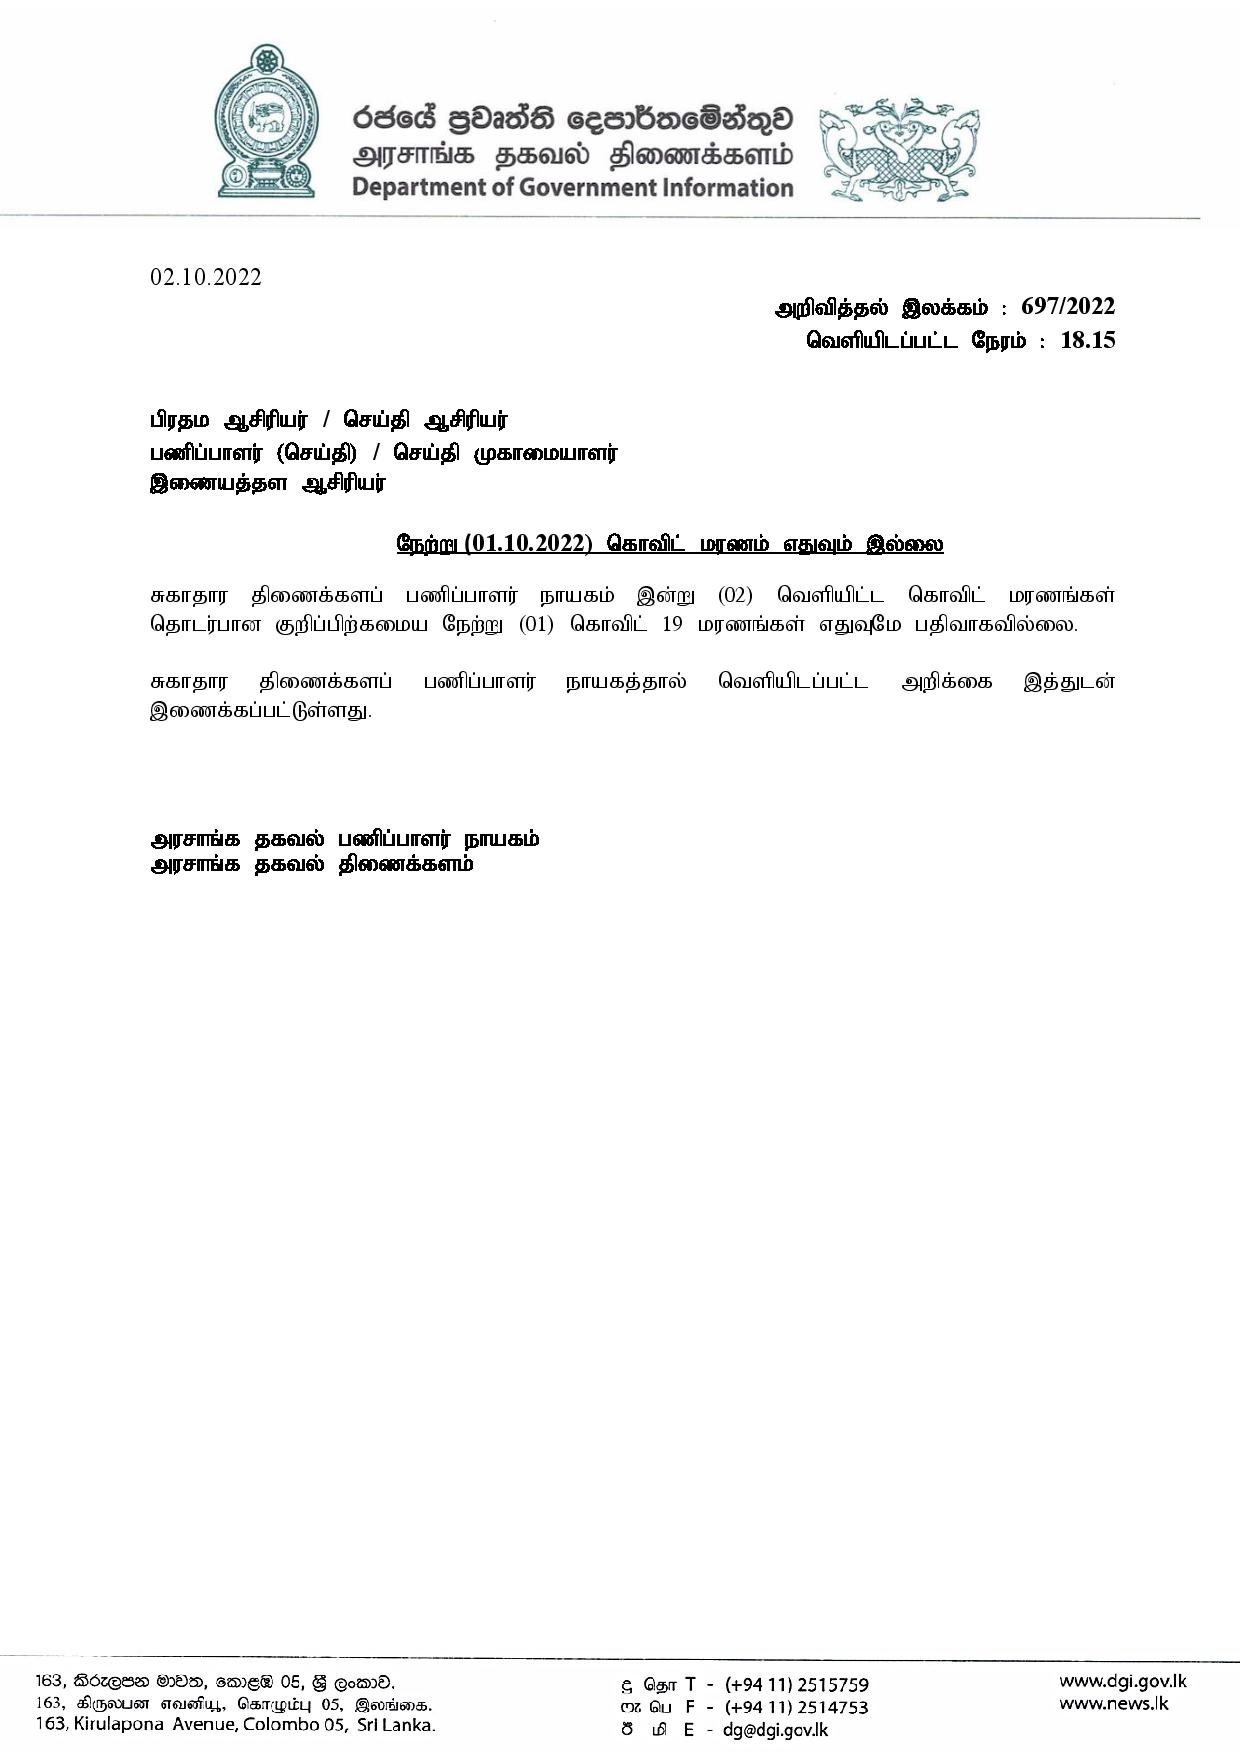 Release No 697 Tamil page 001